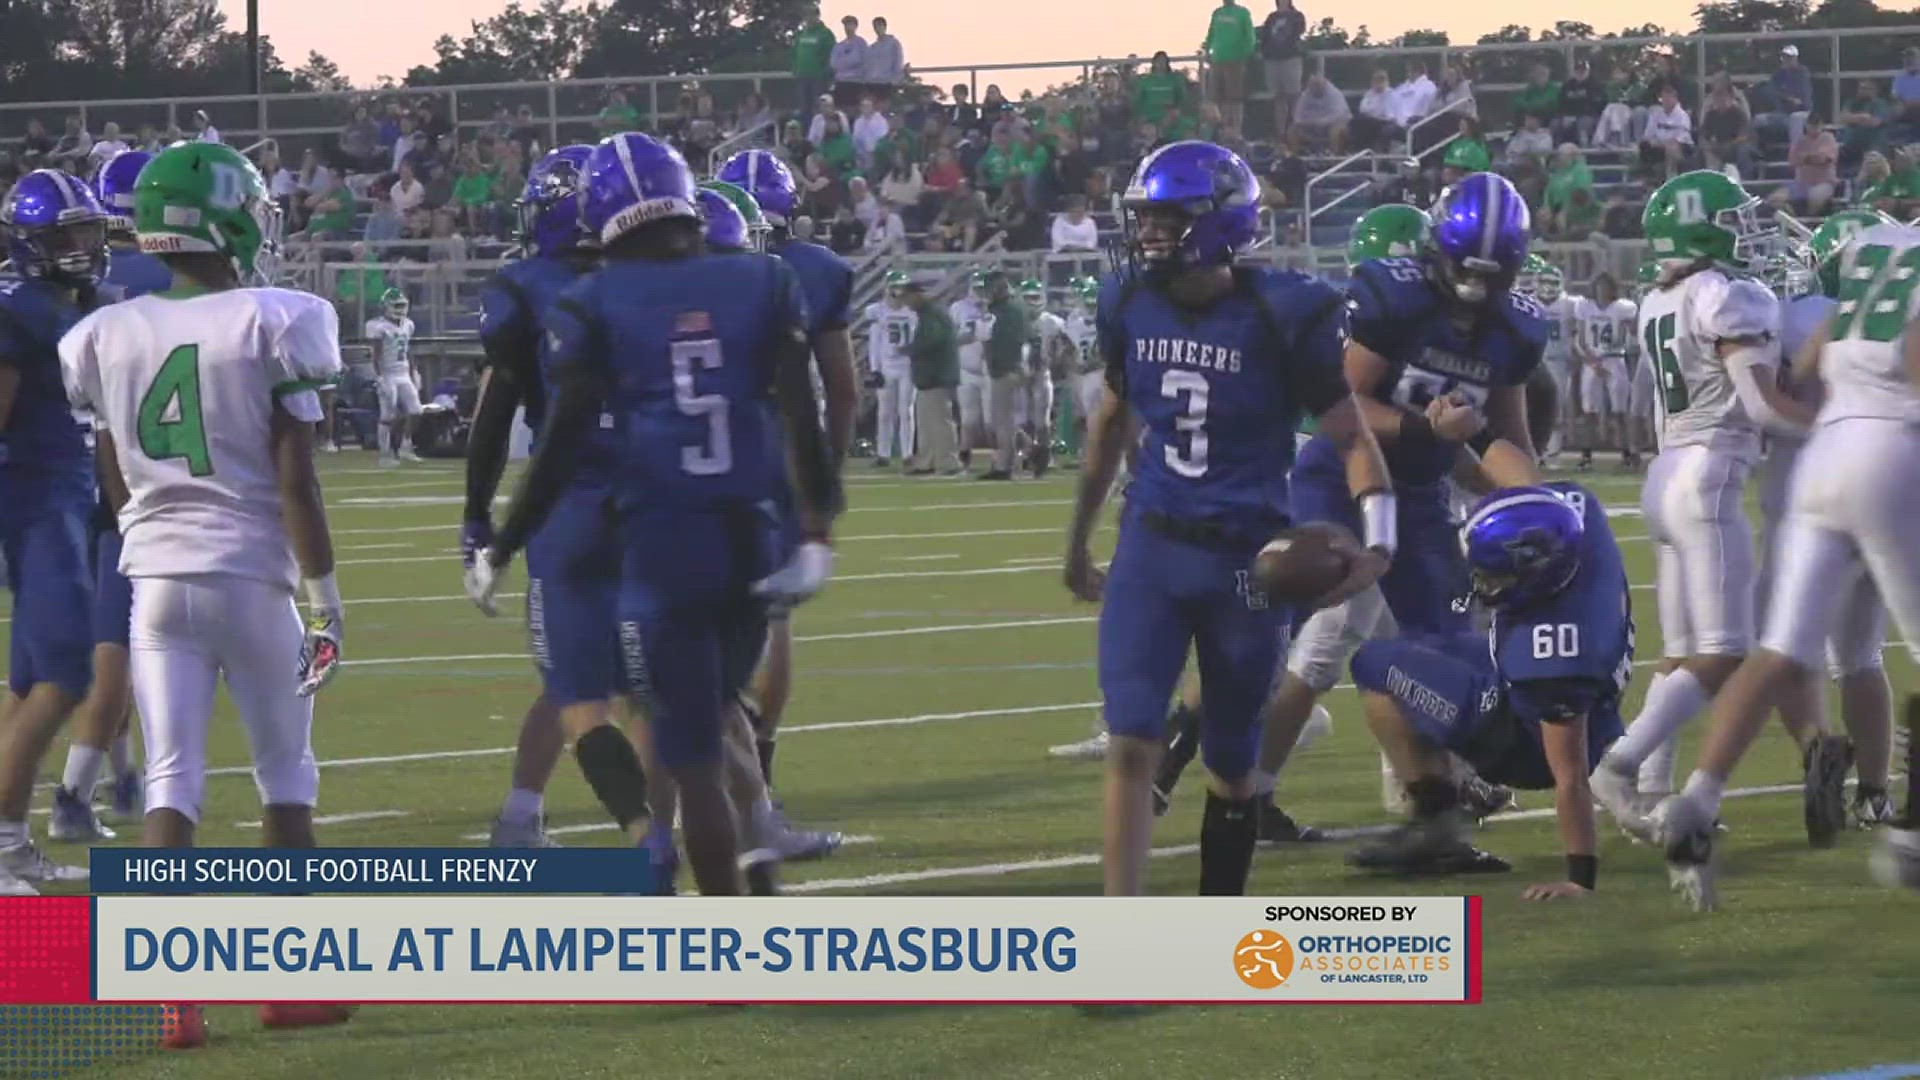 Lampeter-Strasburg leaves no doubt in front of their home crowd.